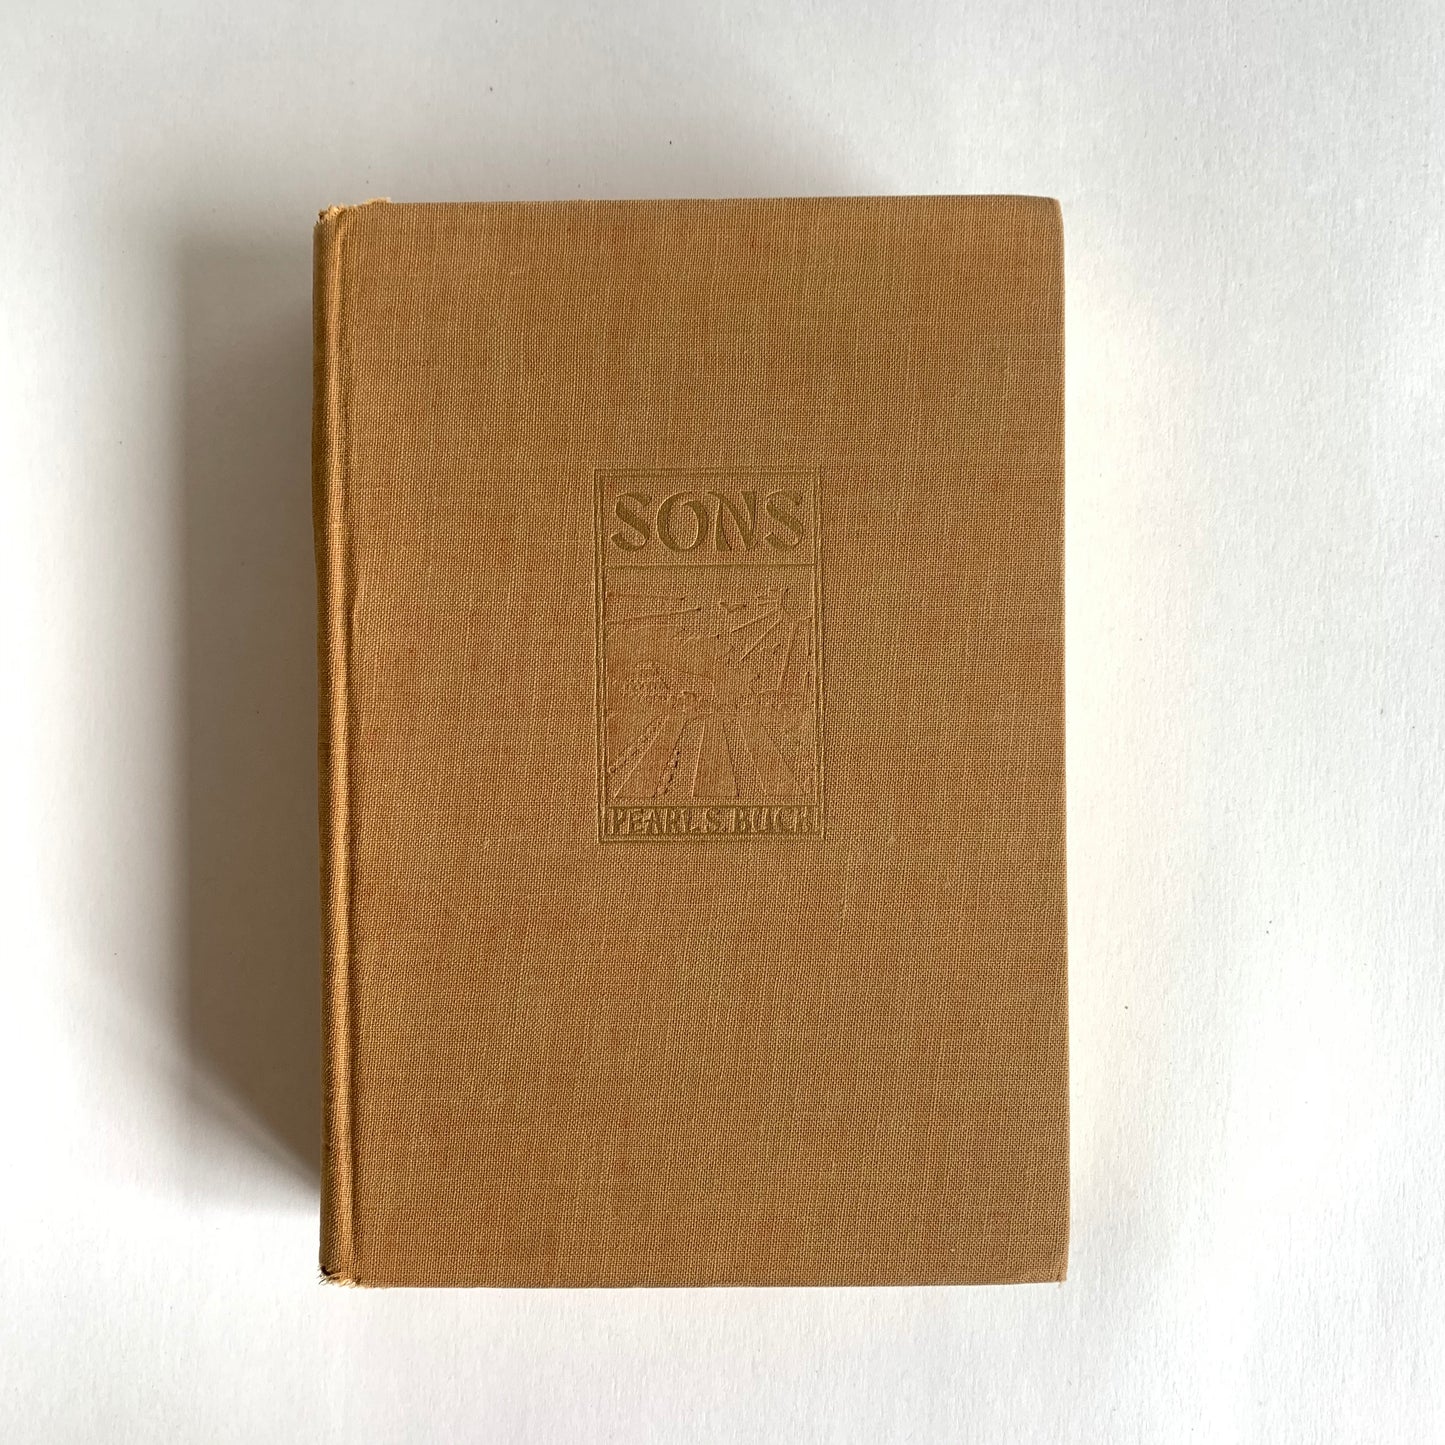 Vintage Book- Sons by Pearl S. Buck